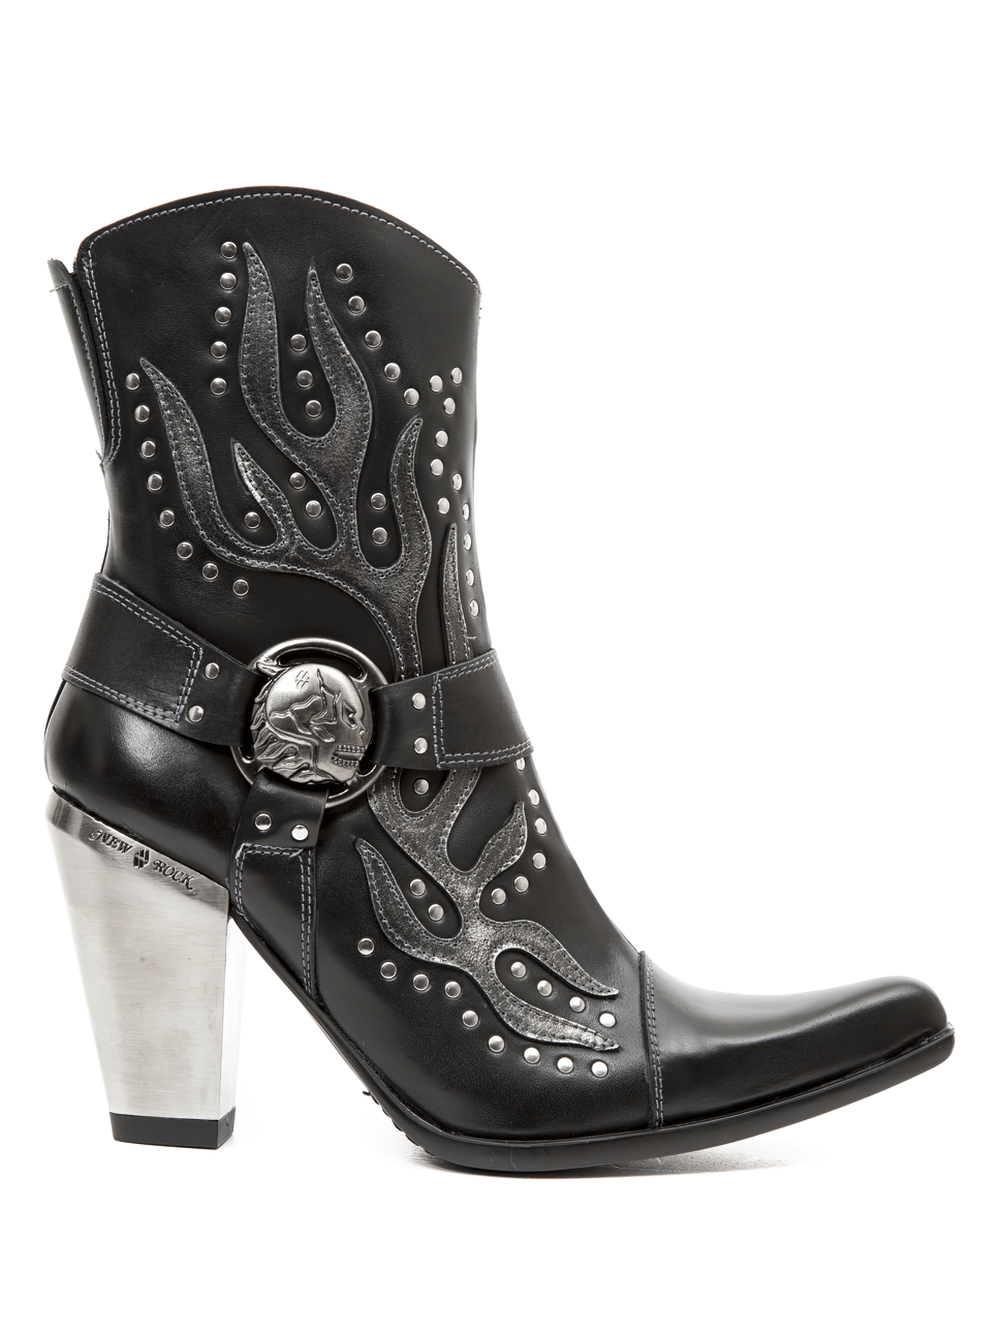 NEW ROCK Studded Black Western Ankle Boots with Buckle